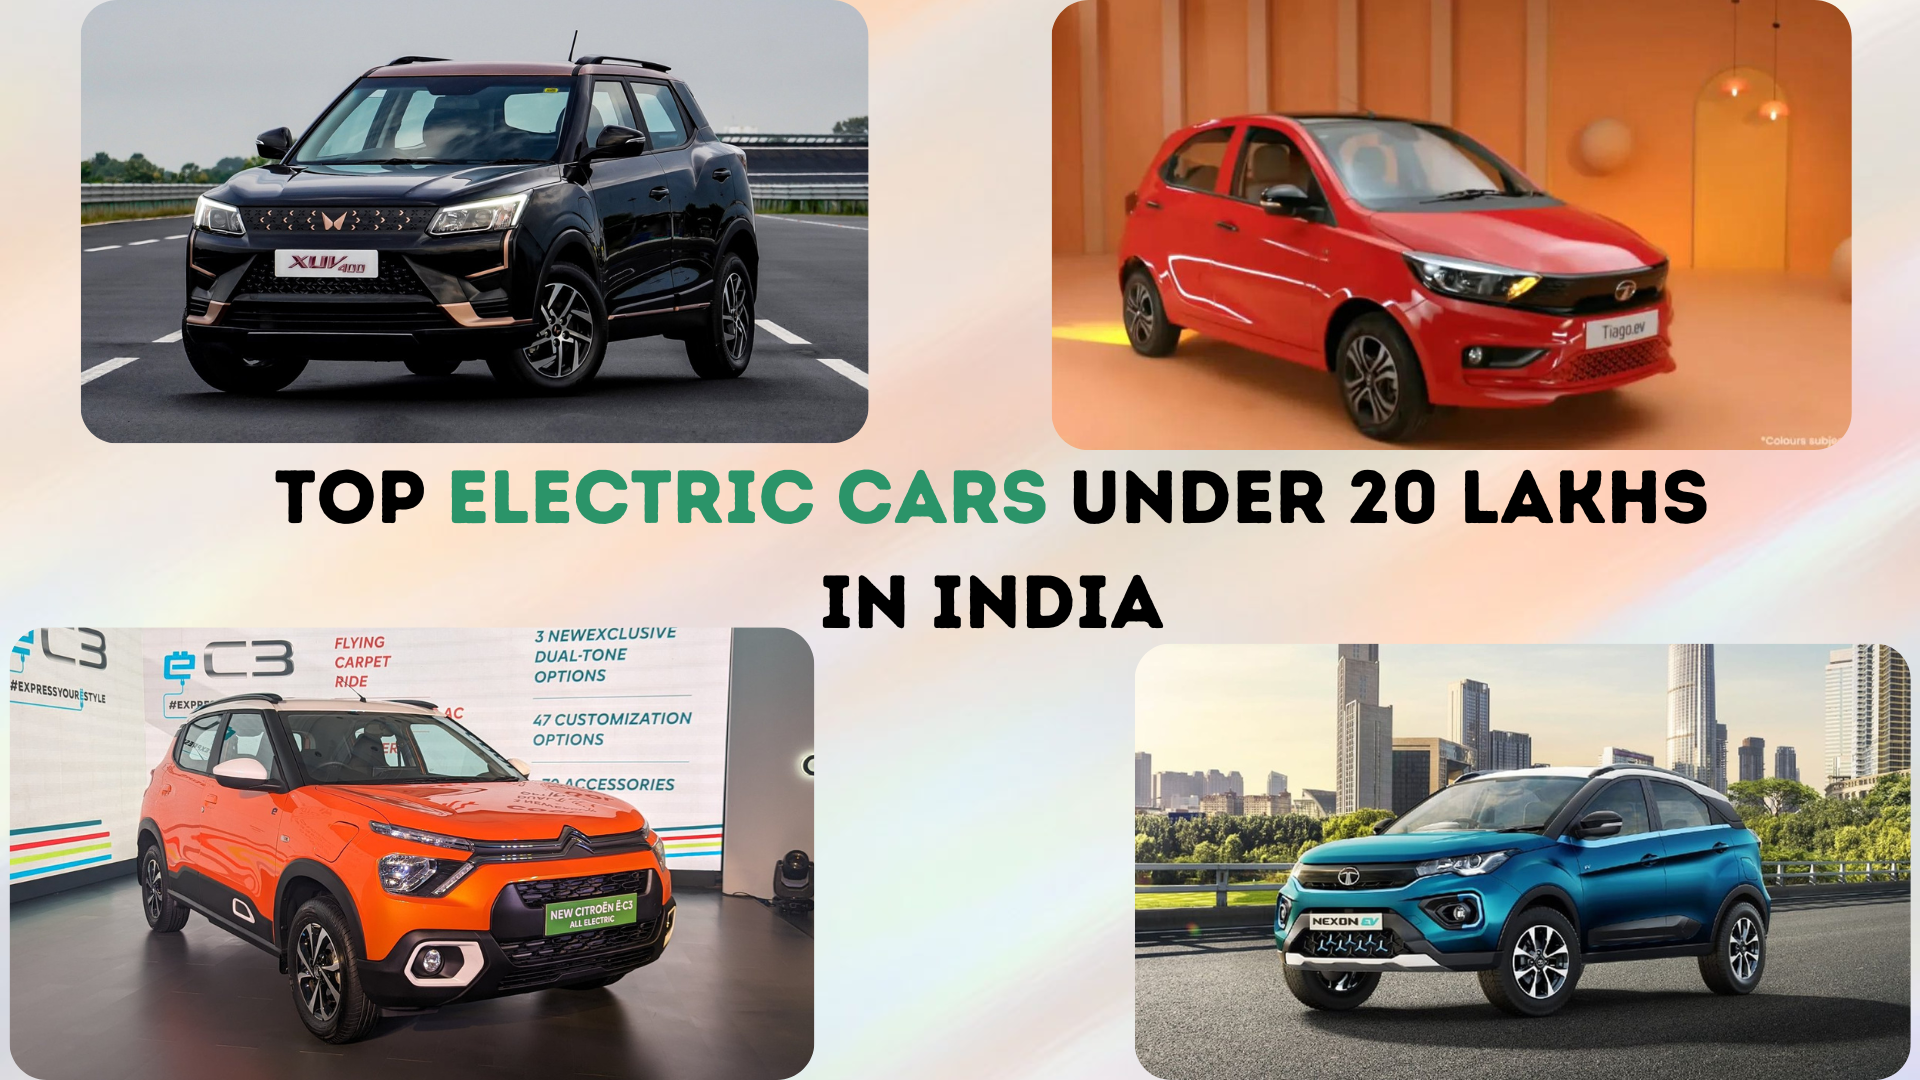 https://e-vehicleinfo.com/top-7-electric-cars-under-20-lakhs-in-india/